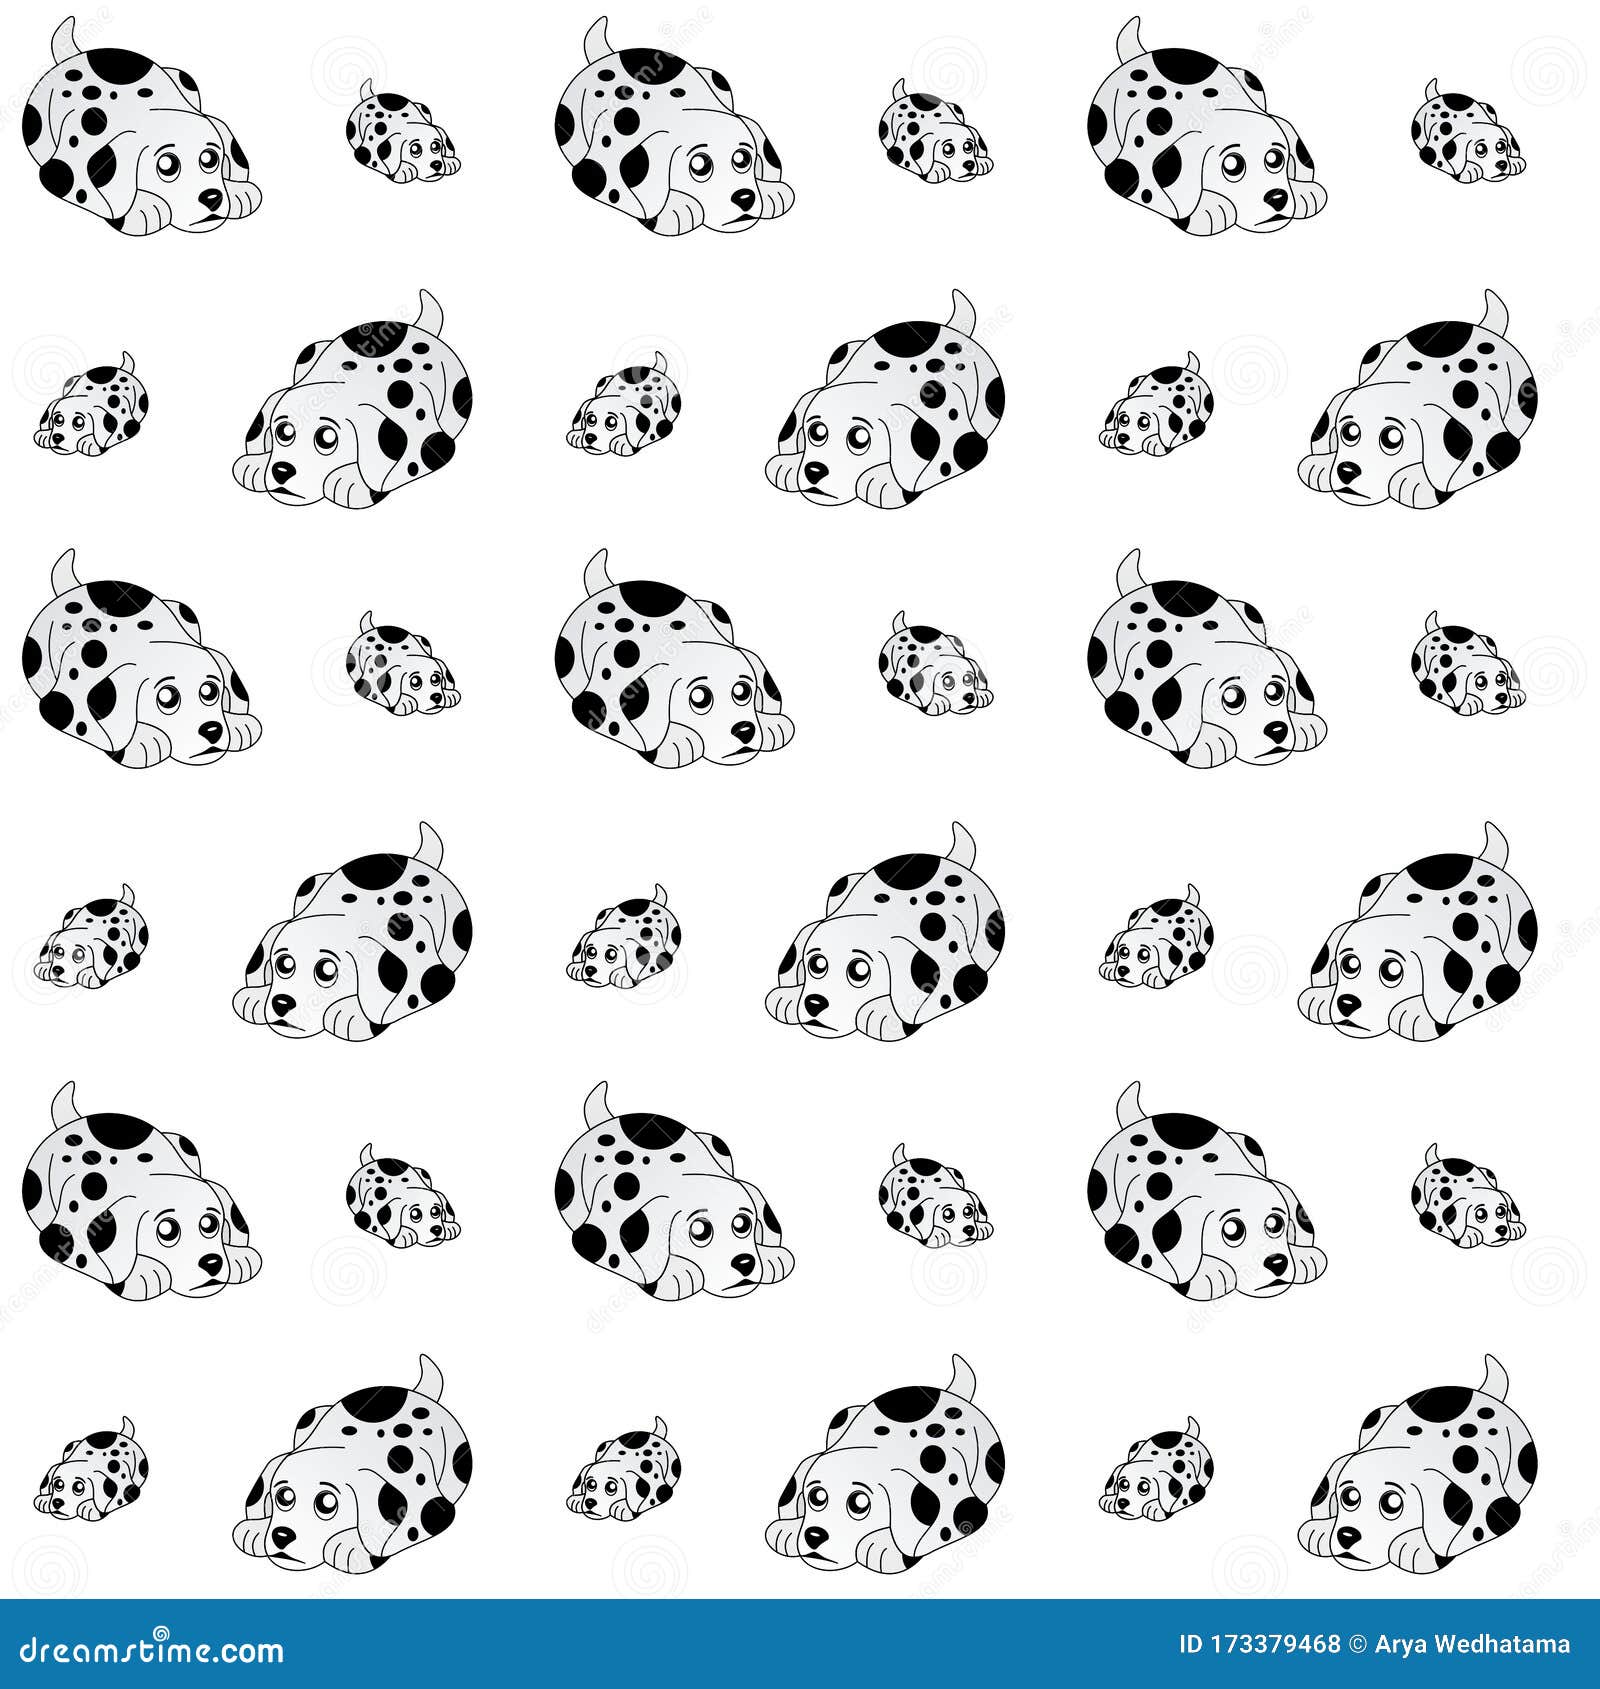 90 Dalmatian HD Wallpapers and Backgrounds